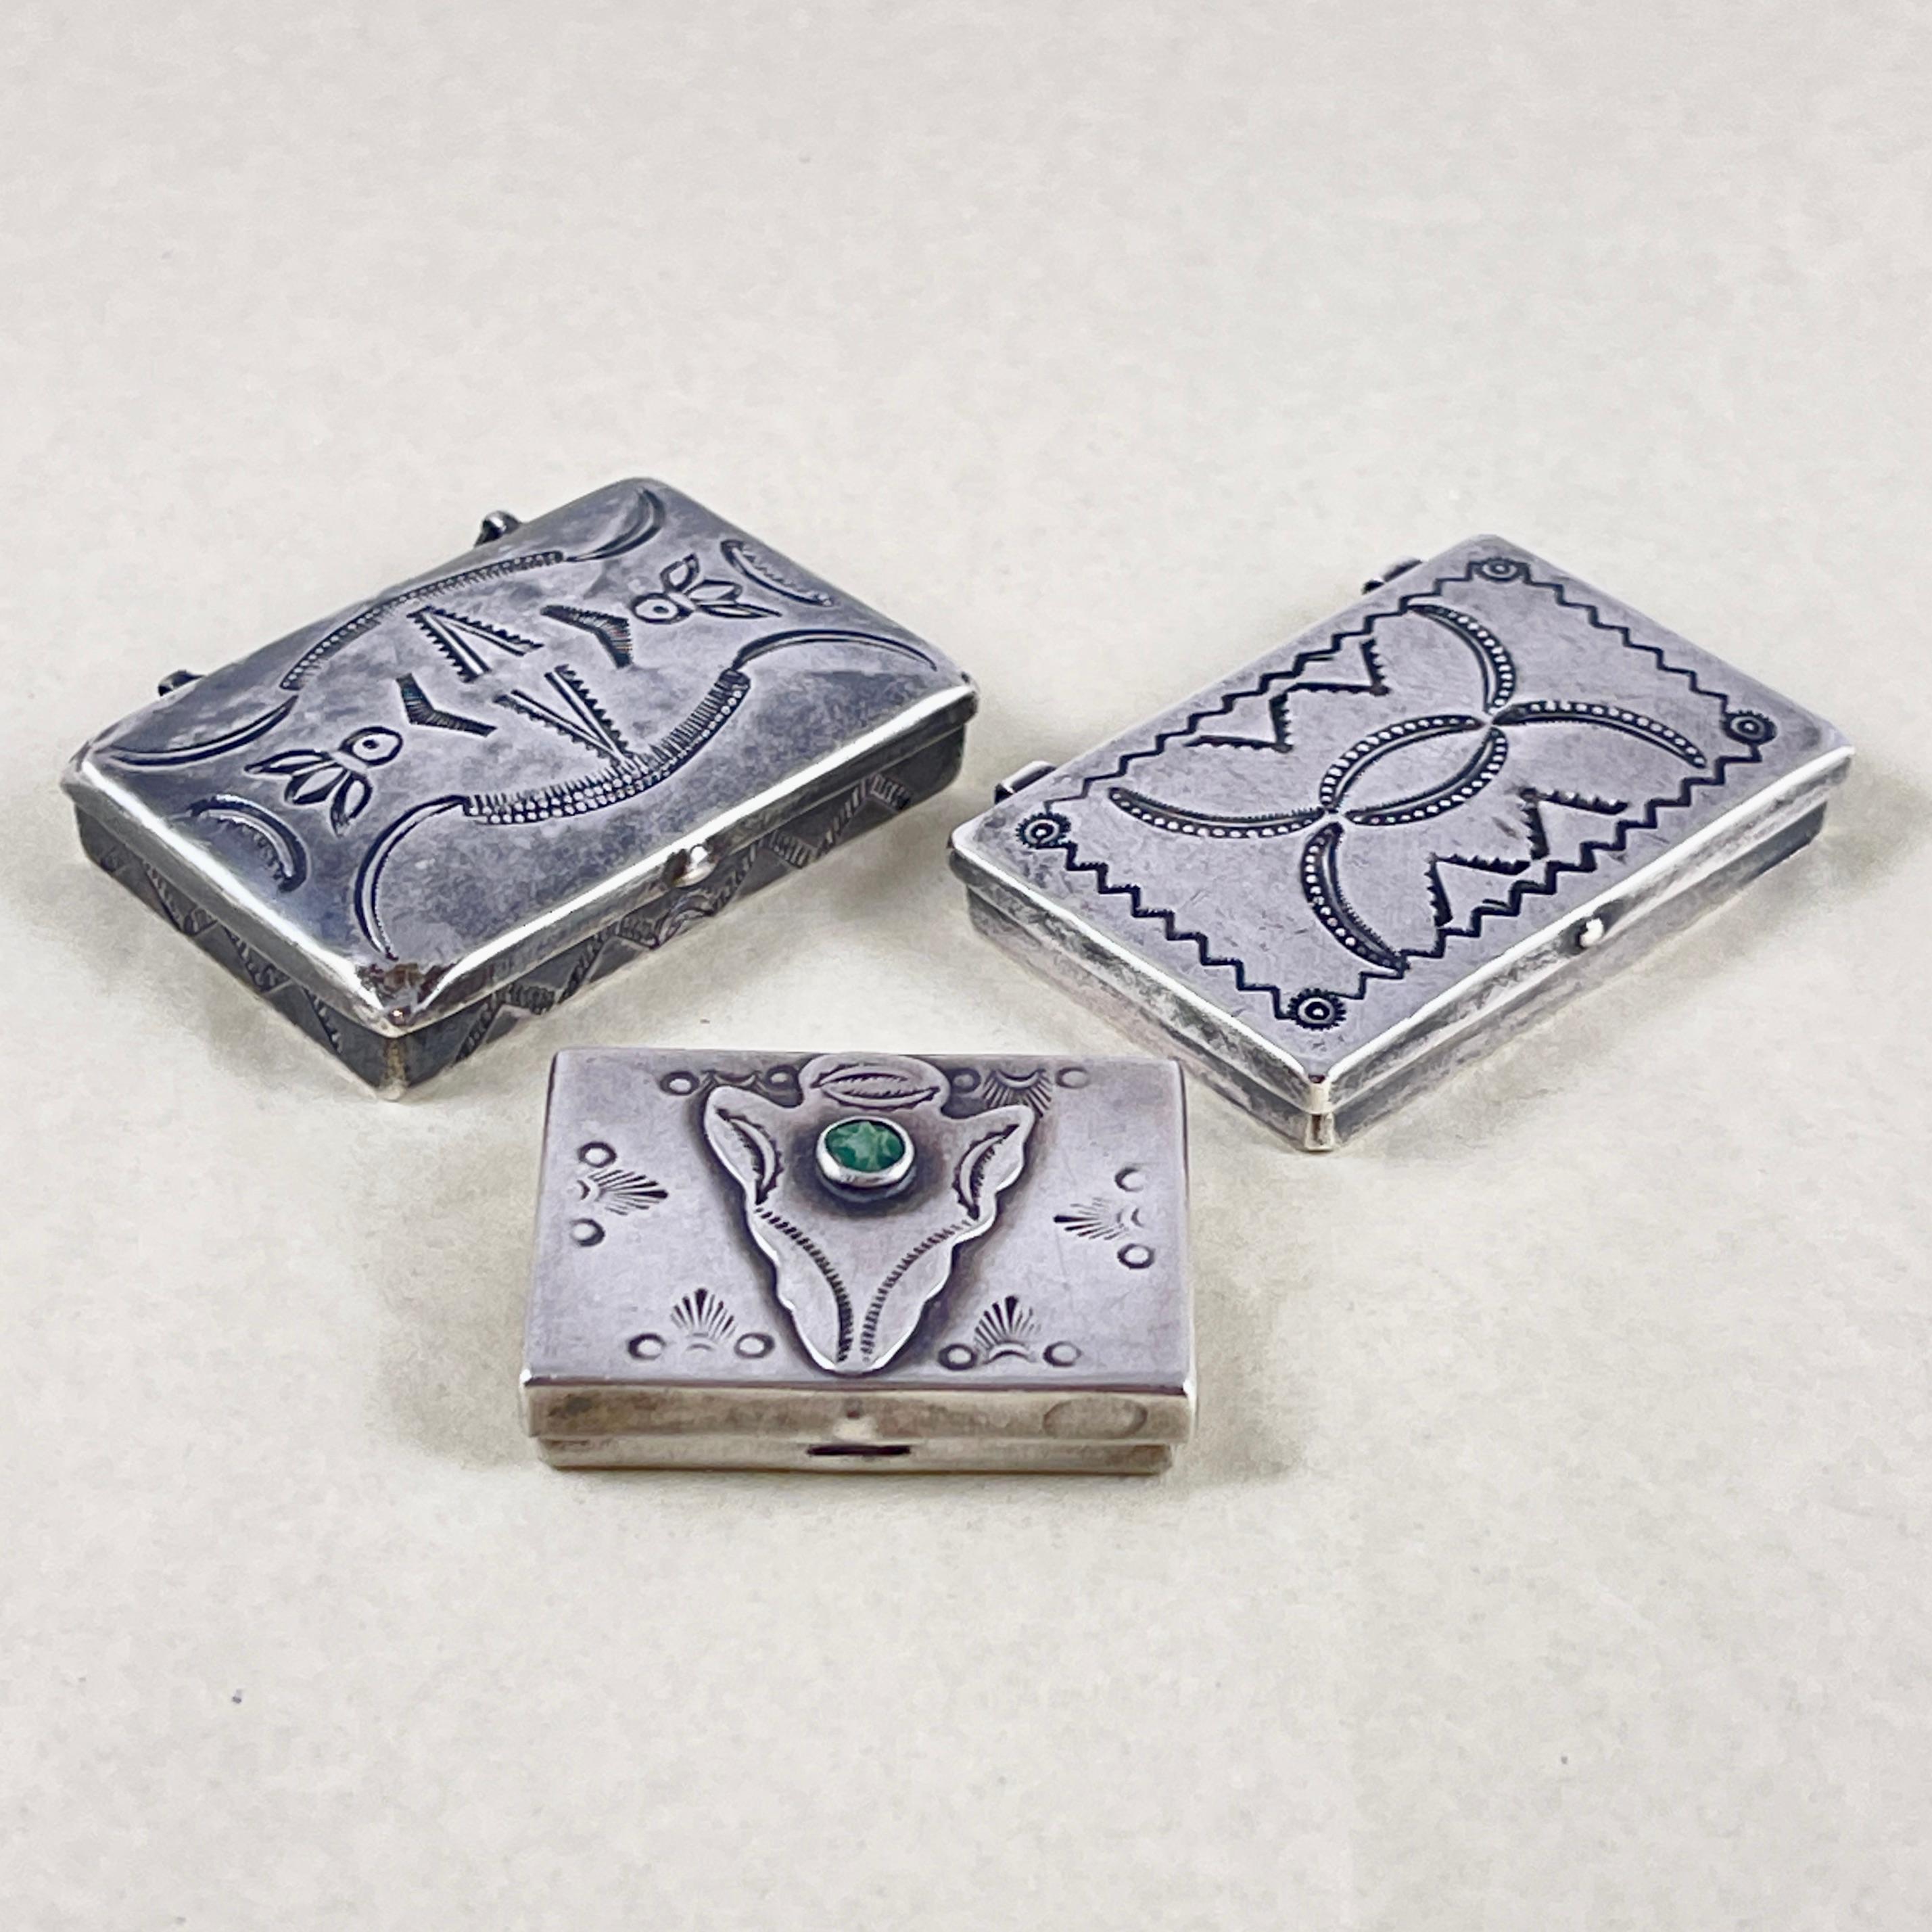 A set of three hand made sterling silver pill cases or trinket boxes, Navajo, Native American – circa 1930s.

The boxes are decorated with tribal stamp work.

1. Box with a convex lid, stamp work to the top and sides. 1.75 in. L x 1.13 in. W x